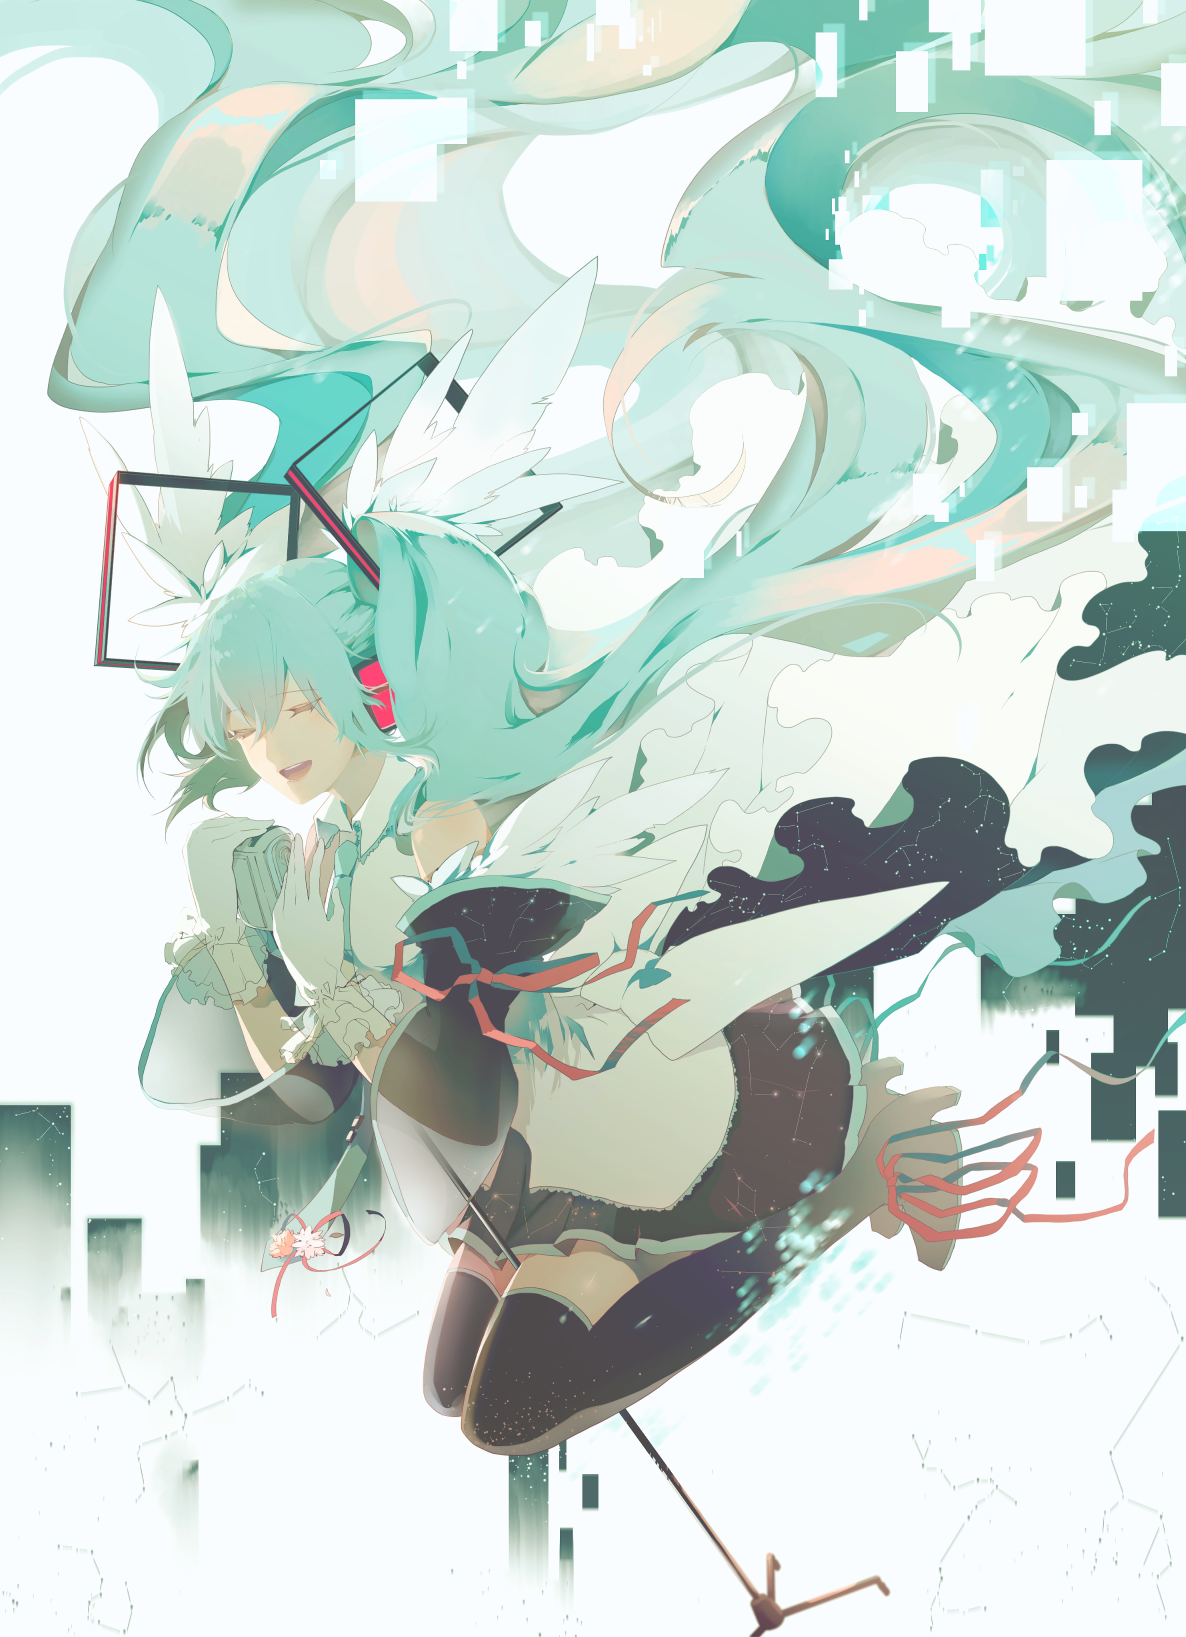 Anime 1186x1637 anime anime girls white background Vocaloid Hatsune Miku long hair twintails singing Pixiv cyan hair stockings black stockings legs together